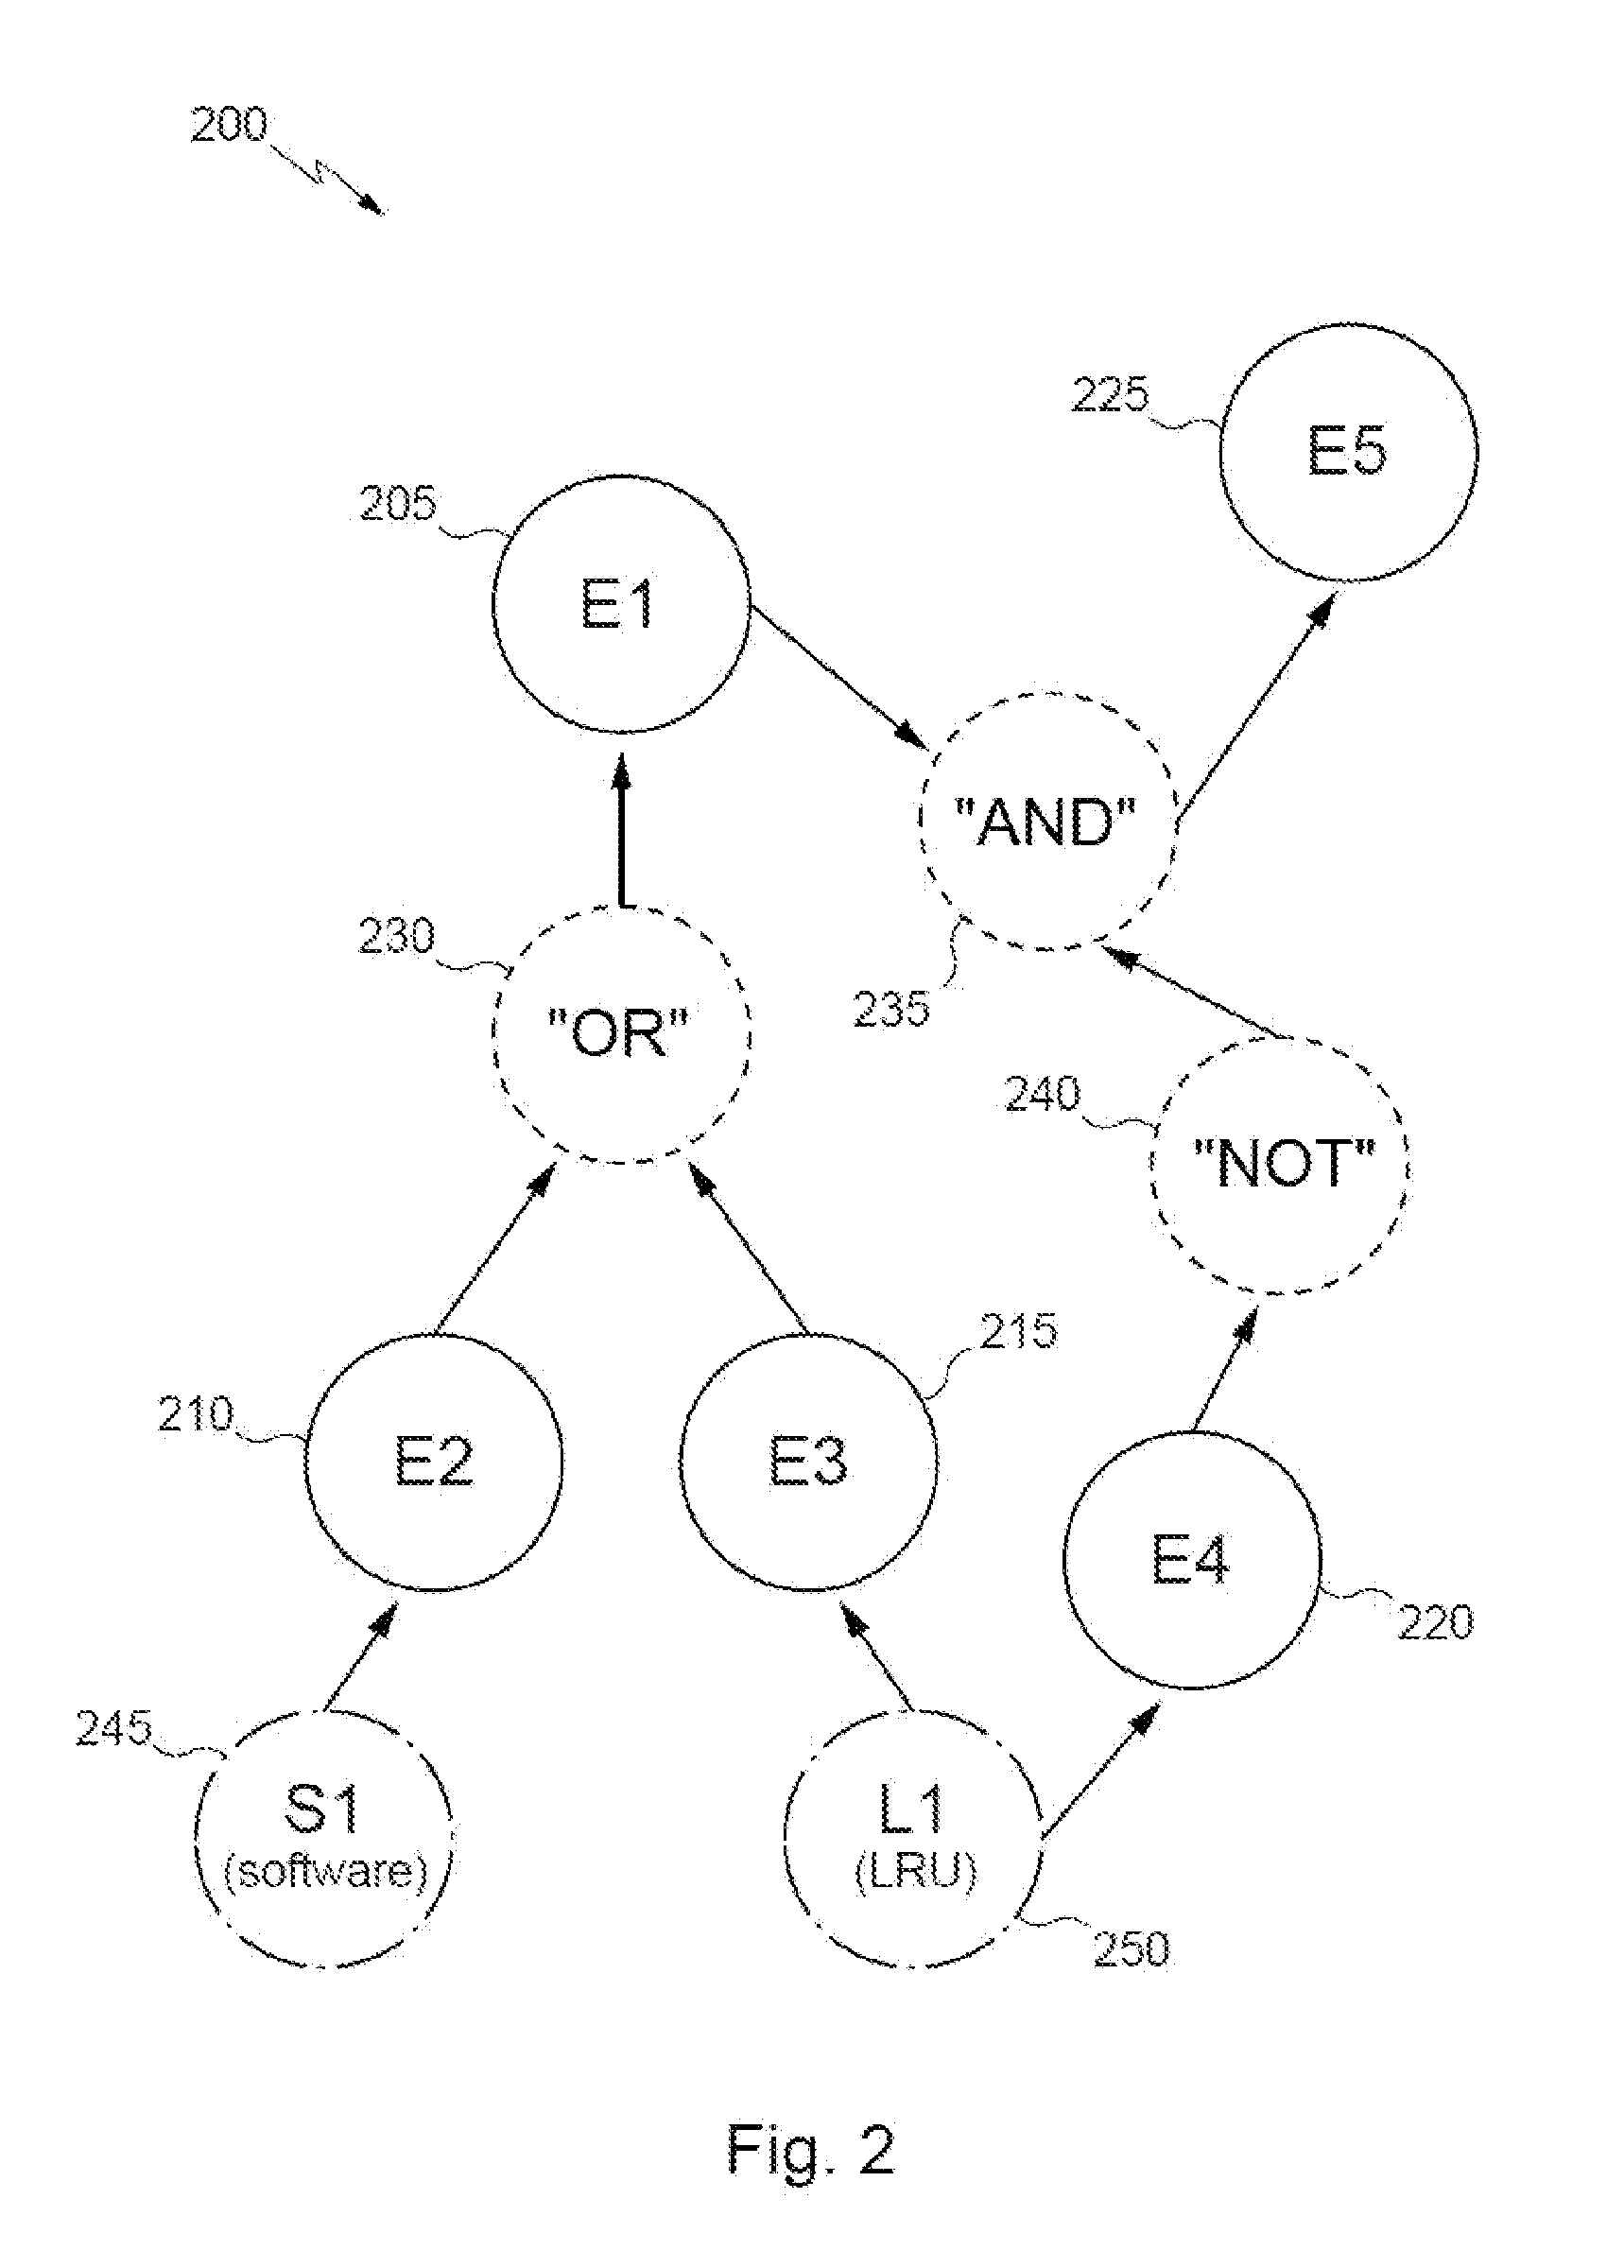 Method, devices and program for computer-aided preventive diagnostics of an aircraft system, using critical event charts